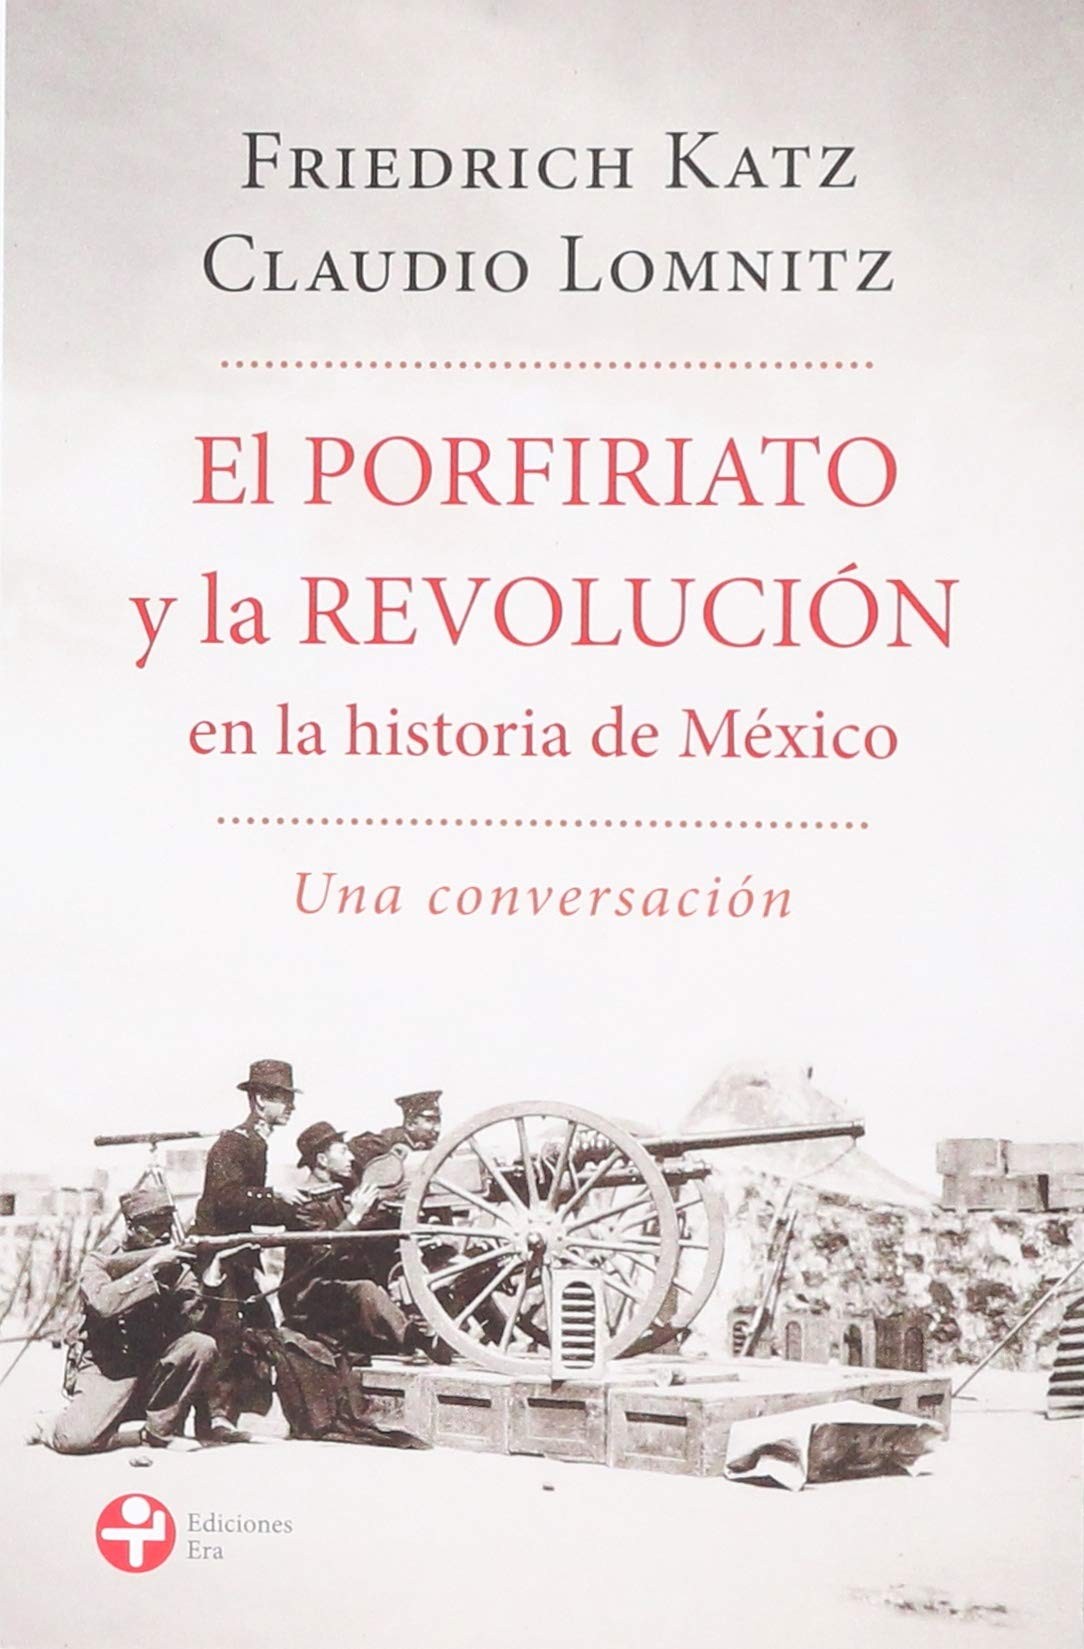 Book cover depicting a group of figures firing a cannon.